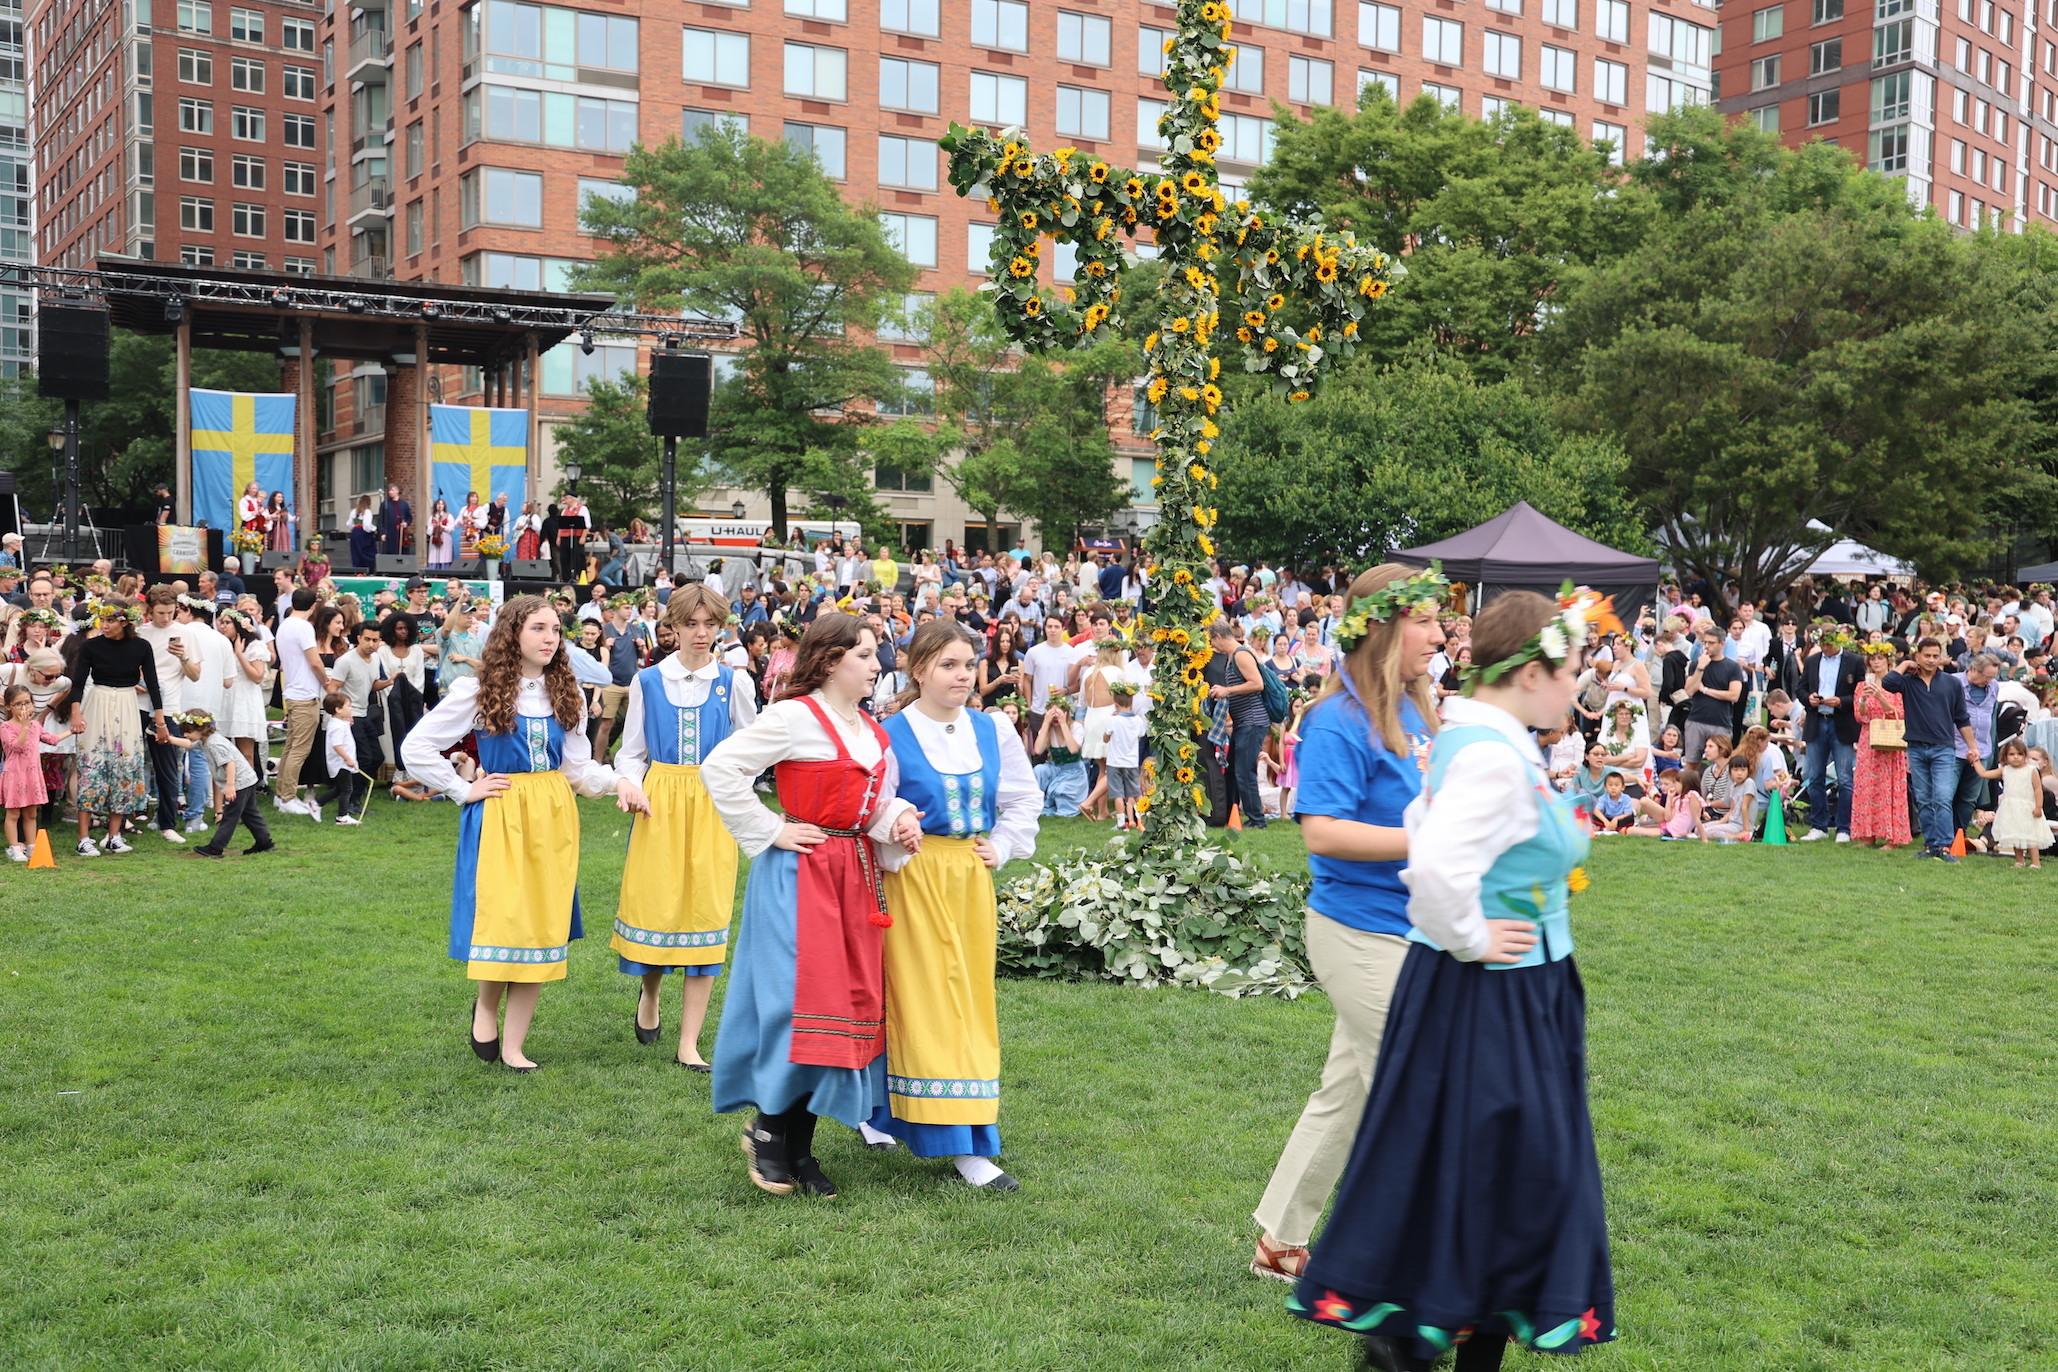 Celebrate the summer solstice at this massive, free Swedish Midsummer festival